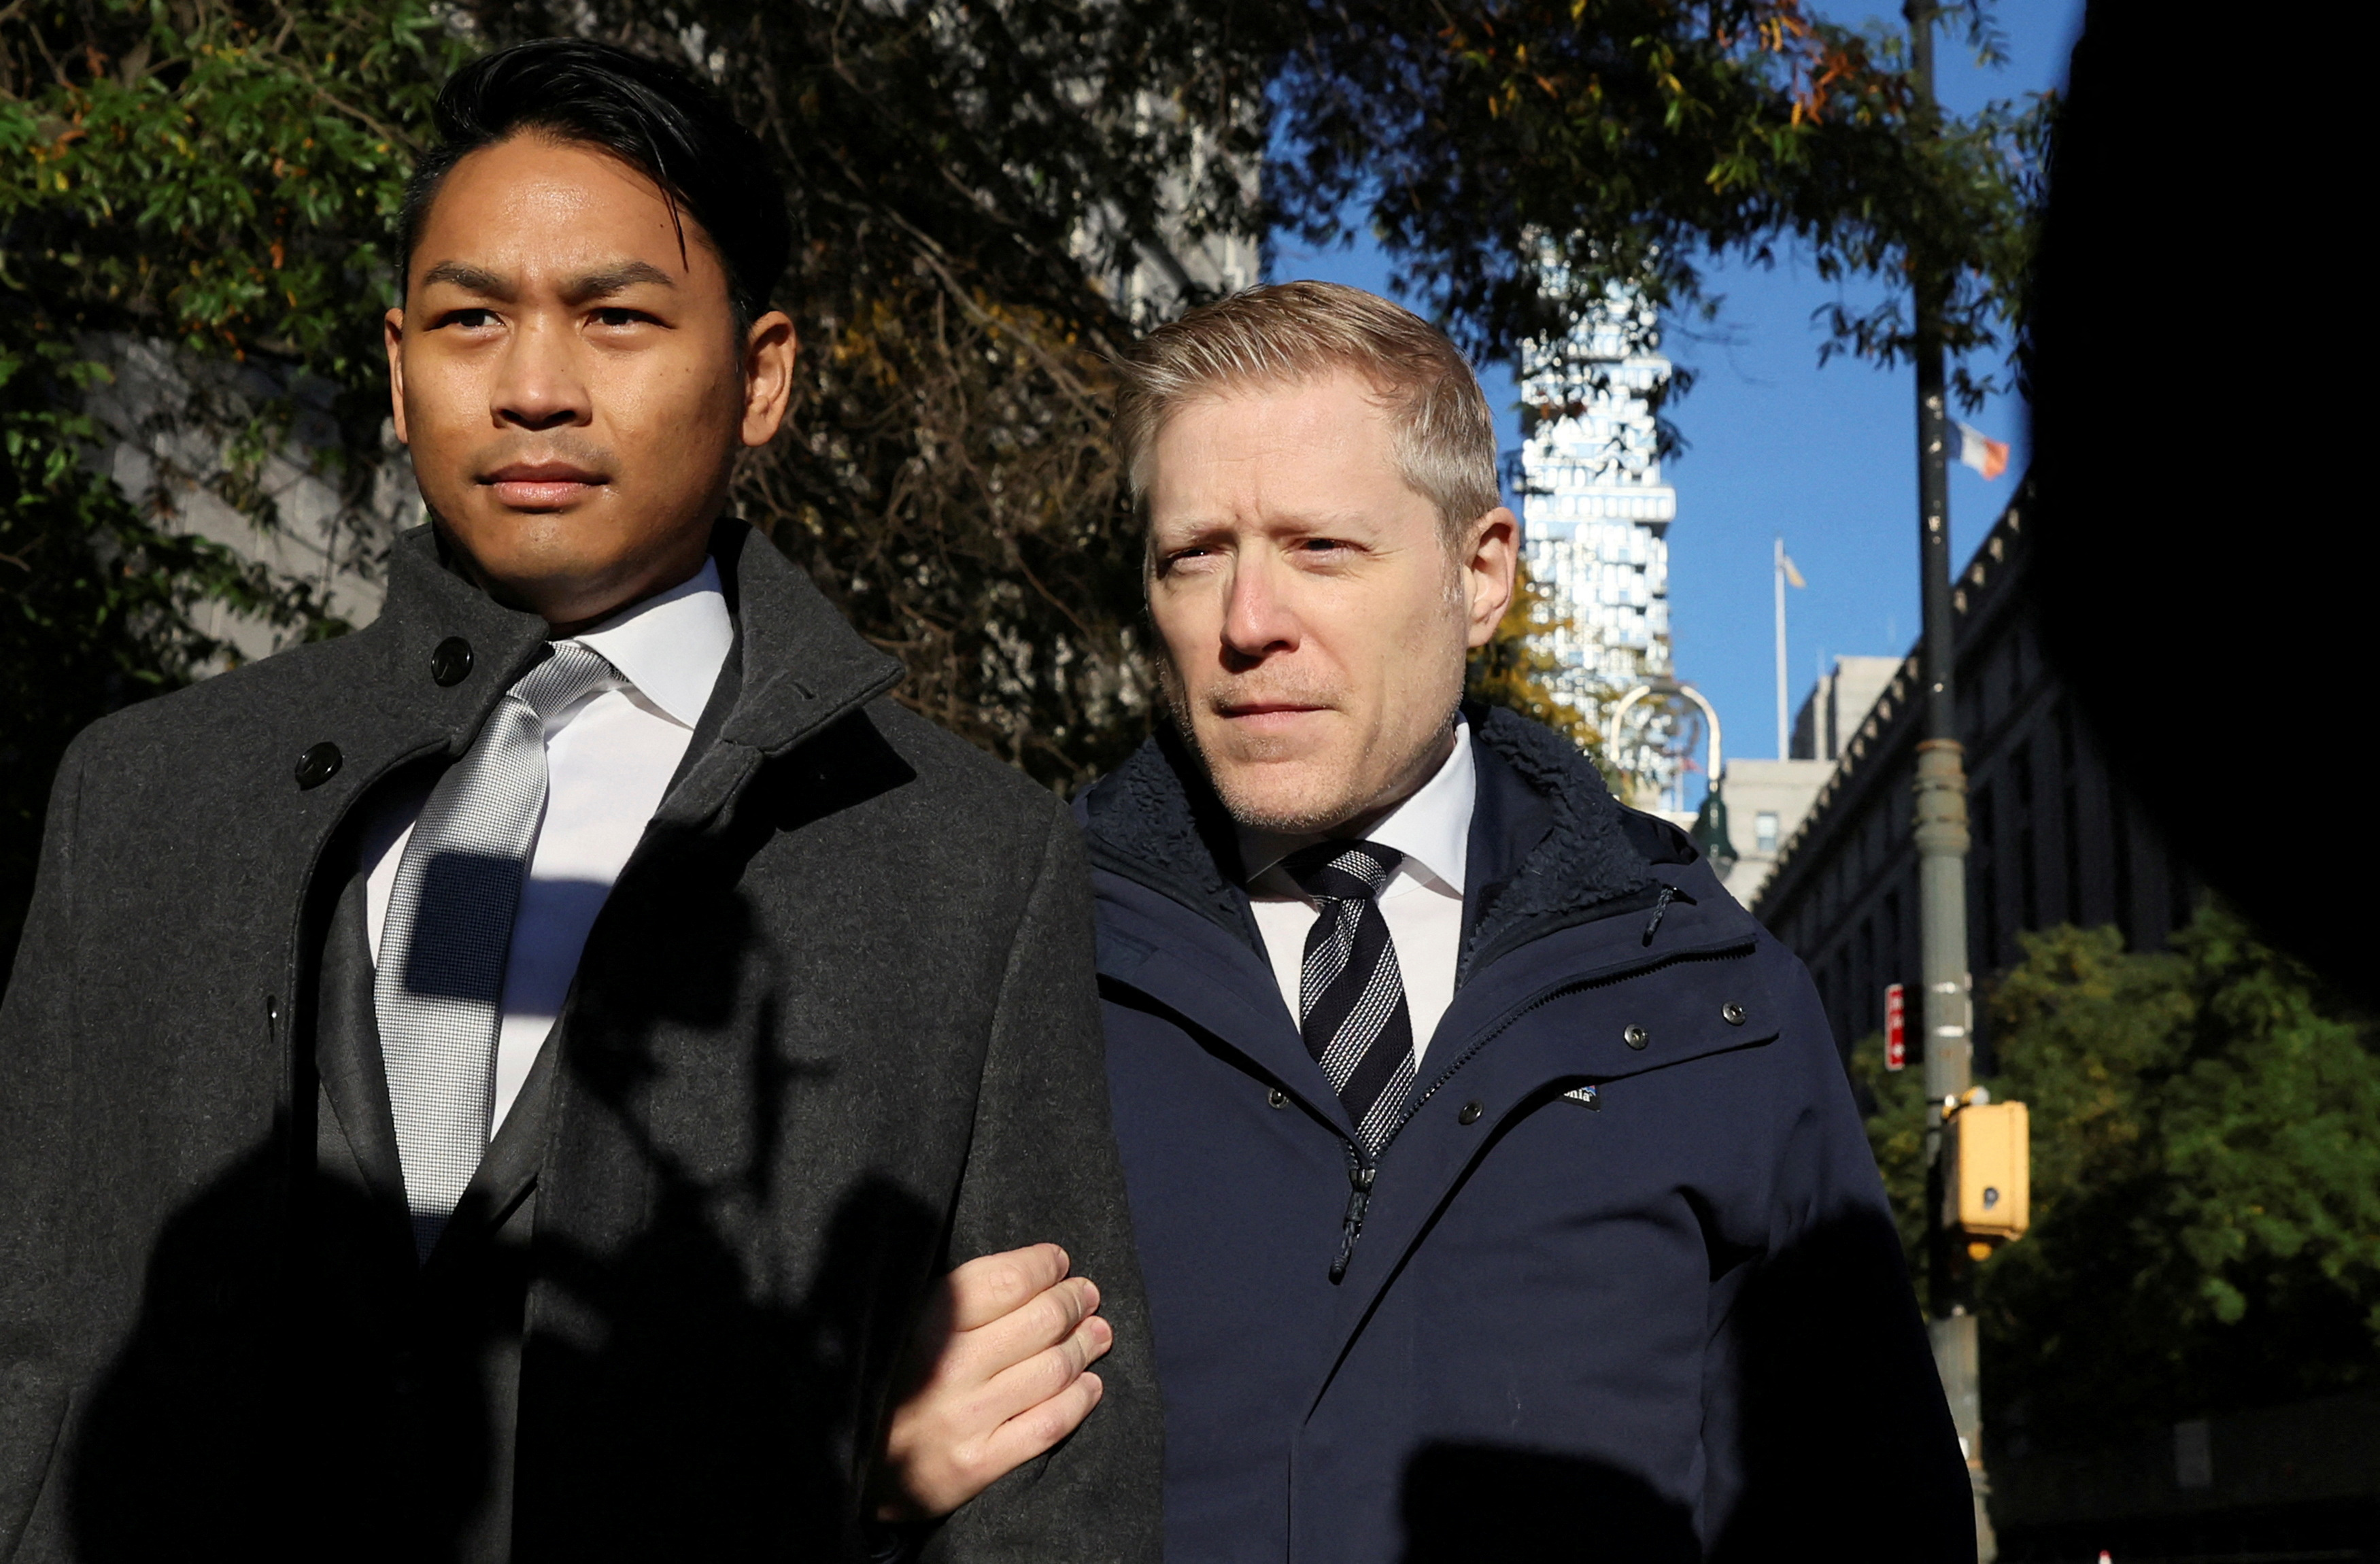 Actor Anthony Rapp arrives at Manhattan Federal Court for his civil trial (Reuters)